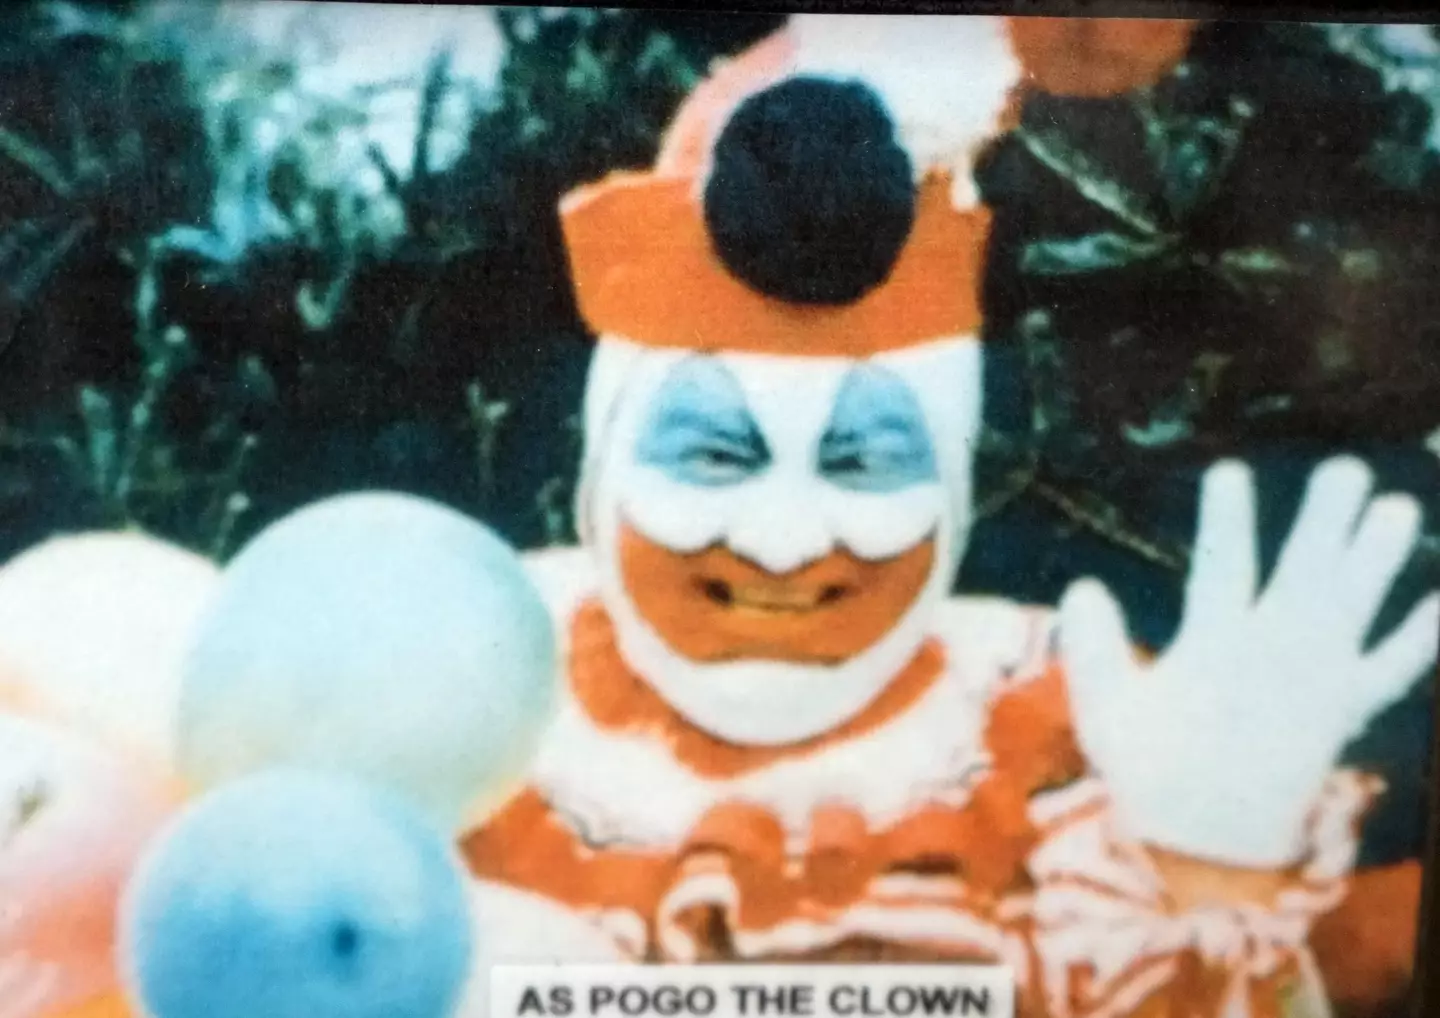 Gacy became known as 'The Killer Clown' following his arrest. (